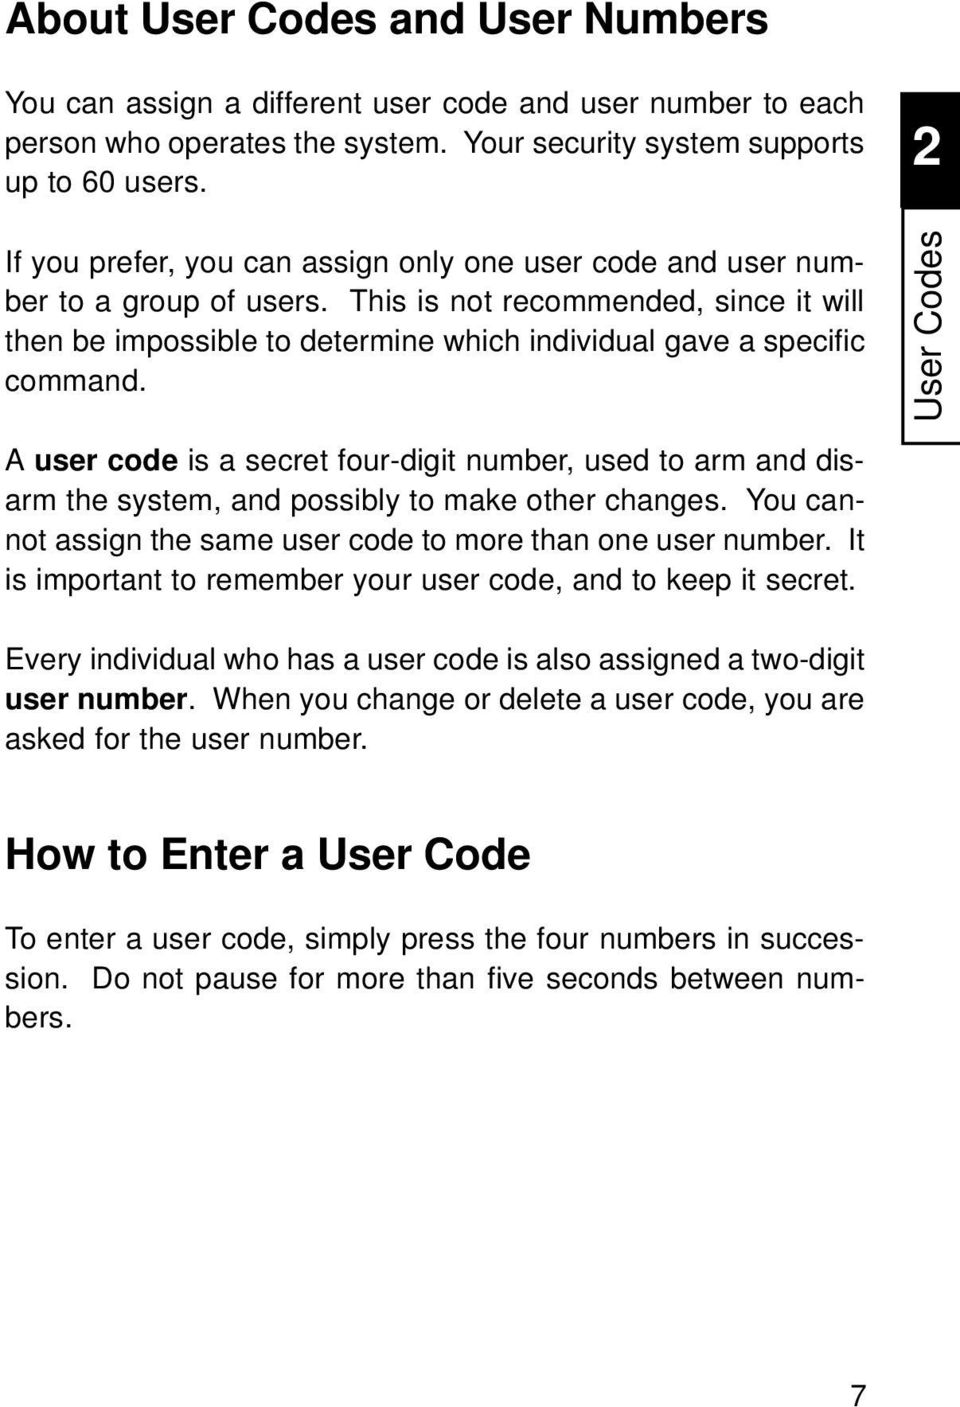 User Codes A user code is a secret four-digit number, used to arm and disarm the system, and possibly to make other changes. You cannot assign the same user code to more than one user number.